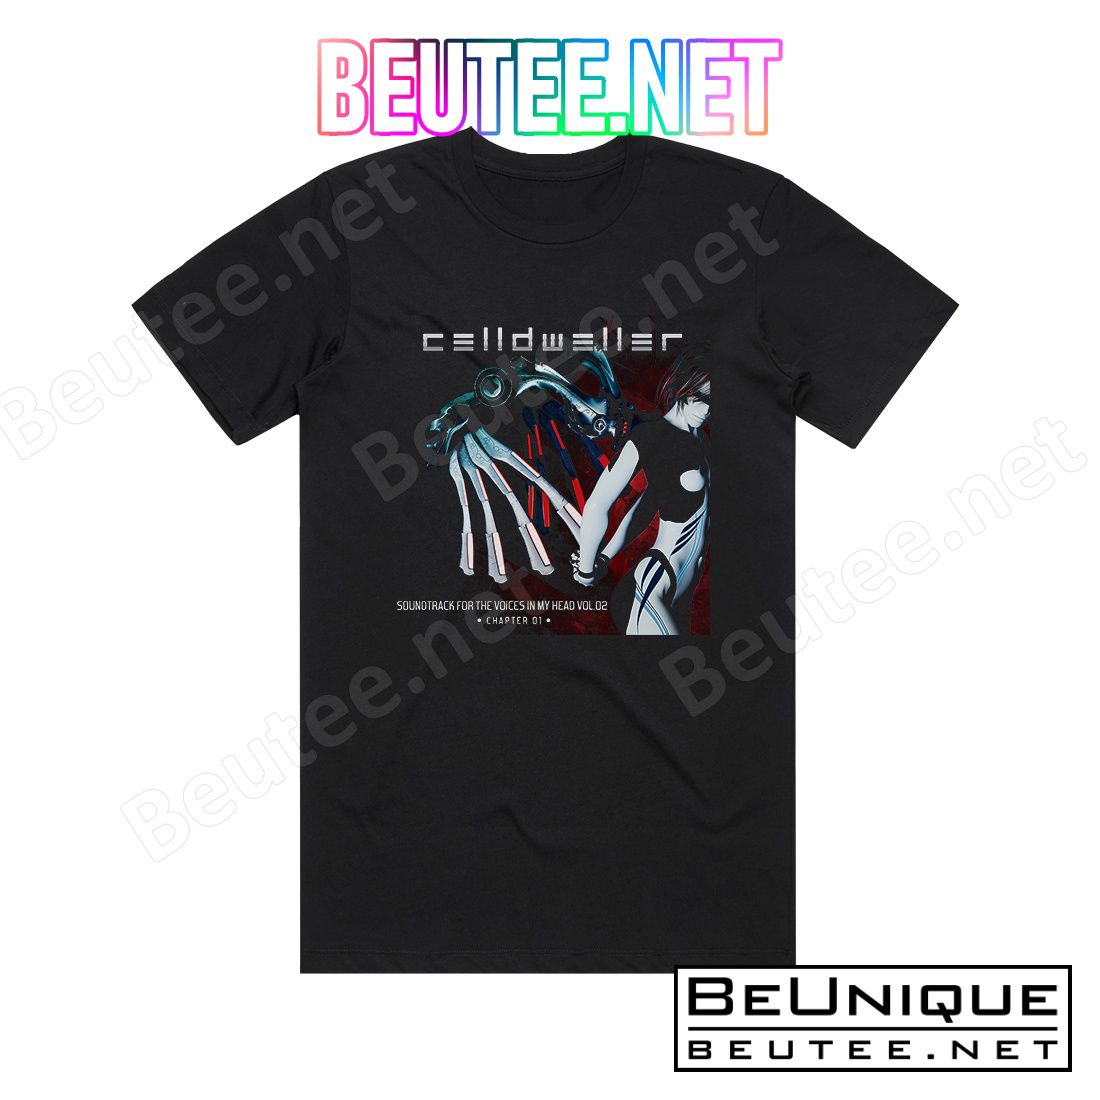 Celldweller Soundtrack For The Voices In My Head Volume 02 Chapter 1 Album Cover T-Shirt